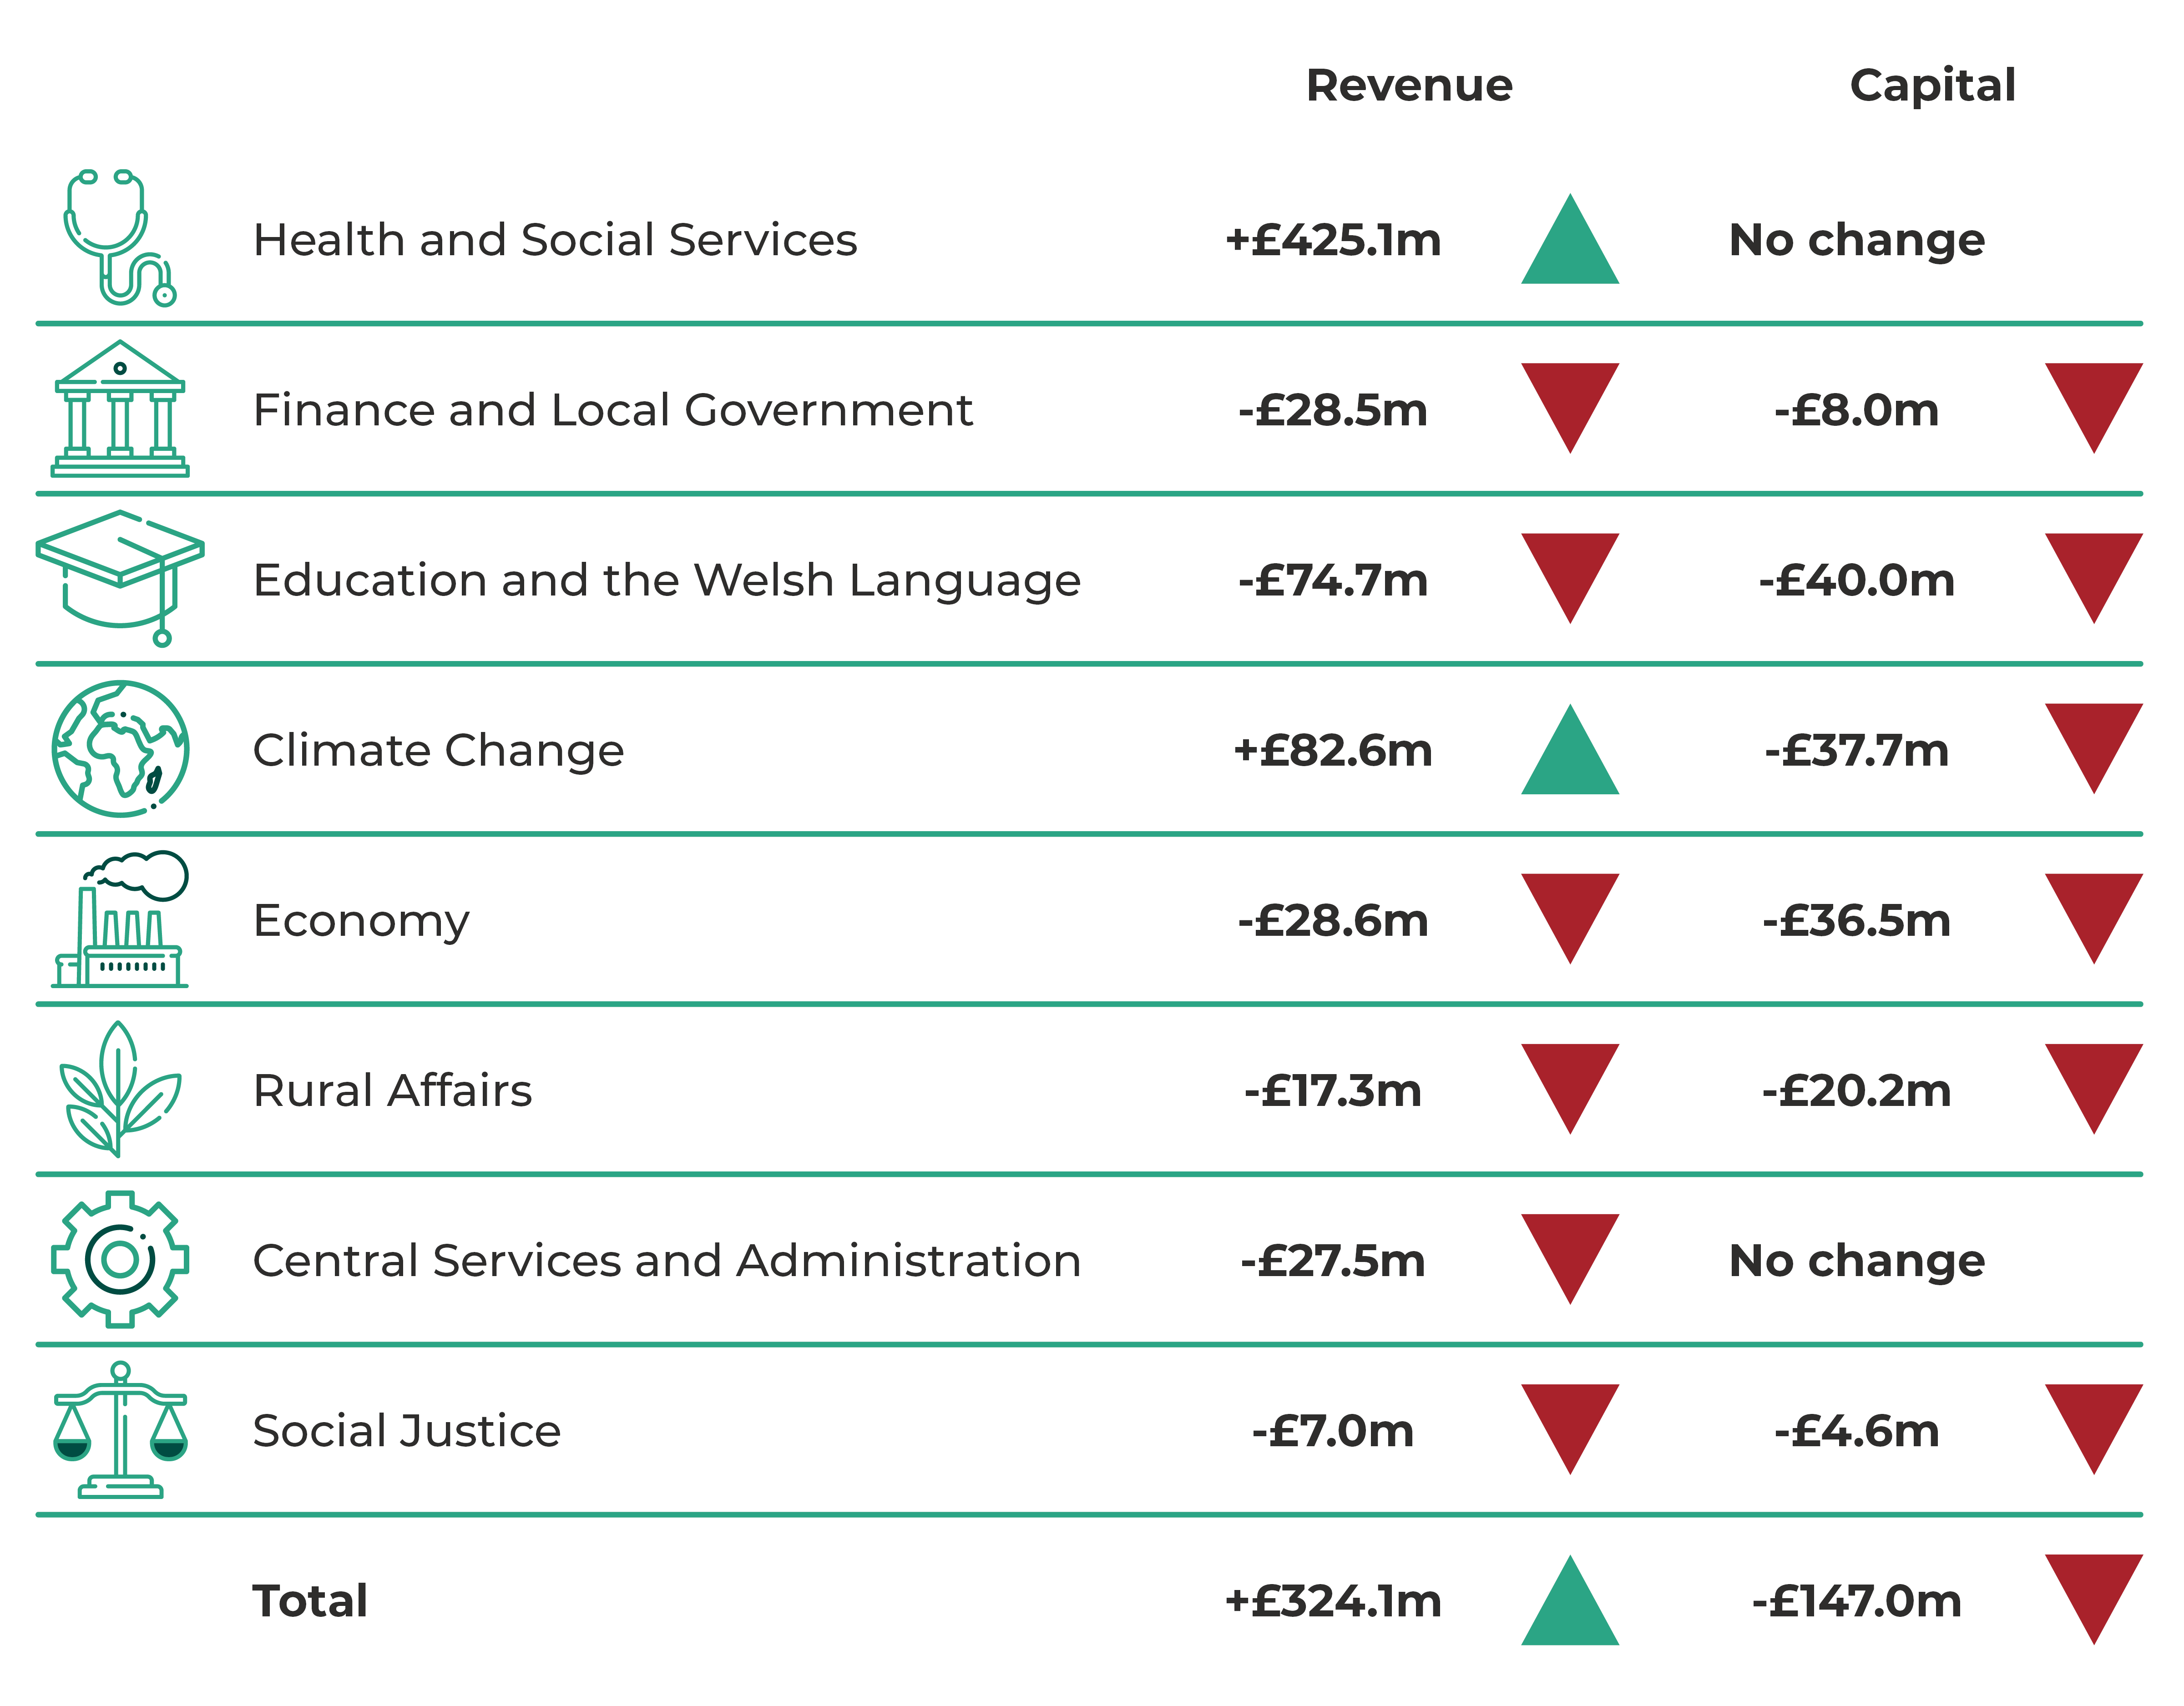 Health and Social Services: Revenue +£425.1m, Capital no change. Finance and Local Government: Revenue -£28.5m, Capital -£8.0m. Education and The Welsh Language: Revenue -74.7m, Capital -£40m. Climate Change: Revenue +£82.6m, Capital -£37.7m. Economy: Revenue -£28.6m, Capital -£36.5m. Rural Affairs: Revenue -£17.3m, Capital -£20.2m. Central Services and Administration: Revenue -£27.5m, Capital no change. Social Justice: Revenue -£7.0m, Capital -£4.6m. Total: Revenue +£324.1m, Capital -£147.0m.